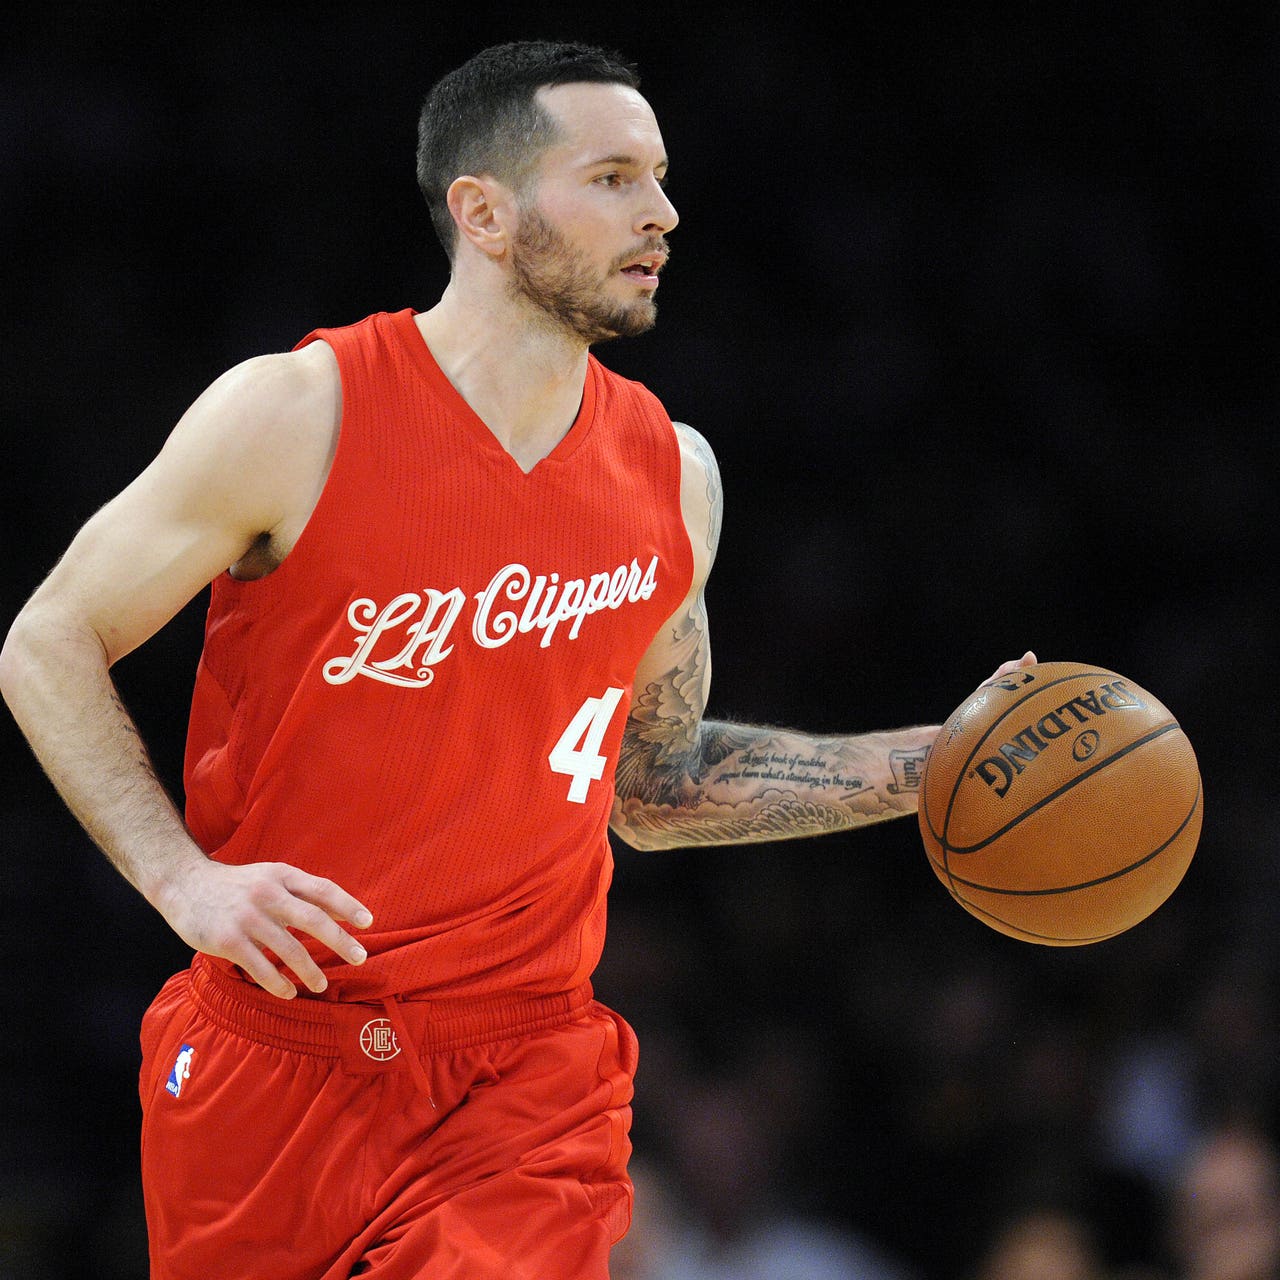 Los Angeles Clippers' J.J. Redick won't play Tuesday